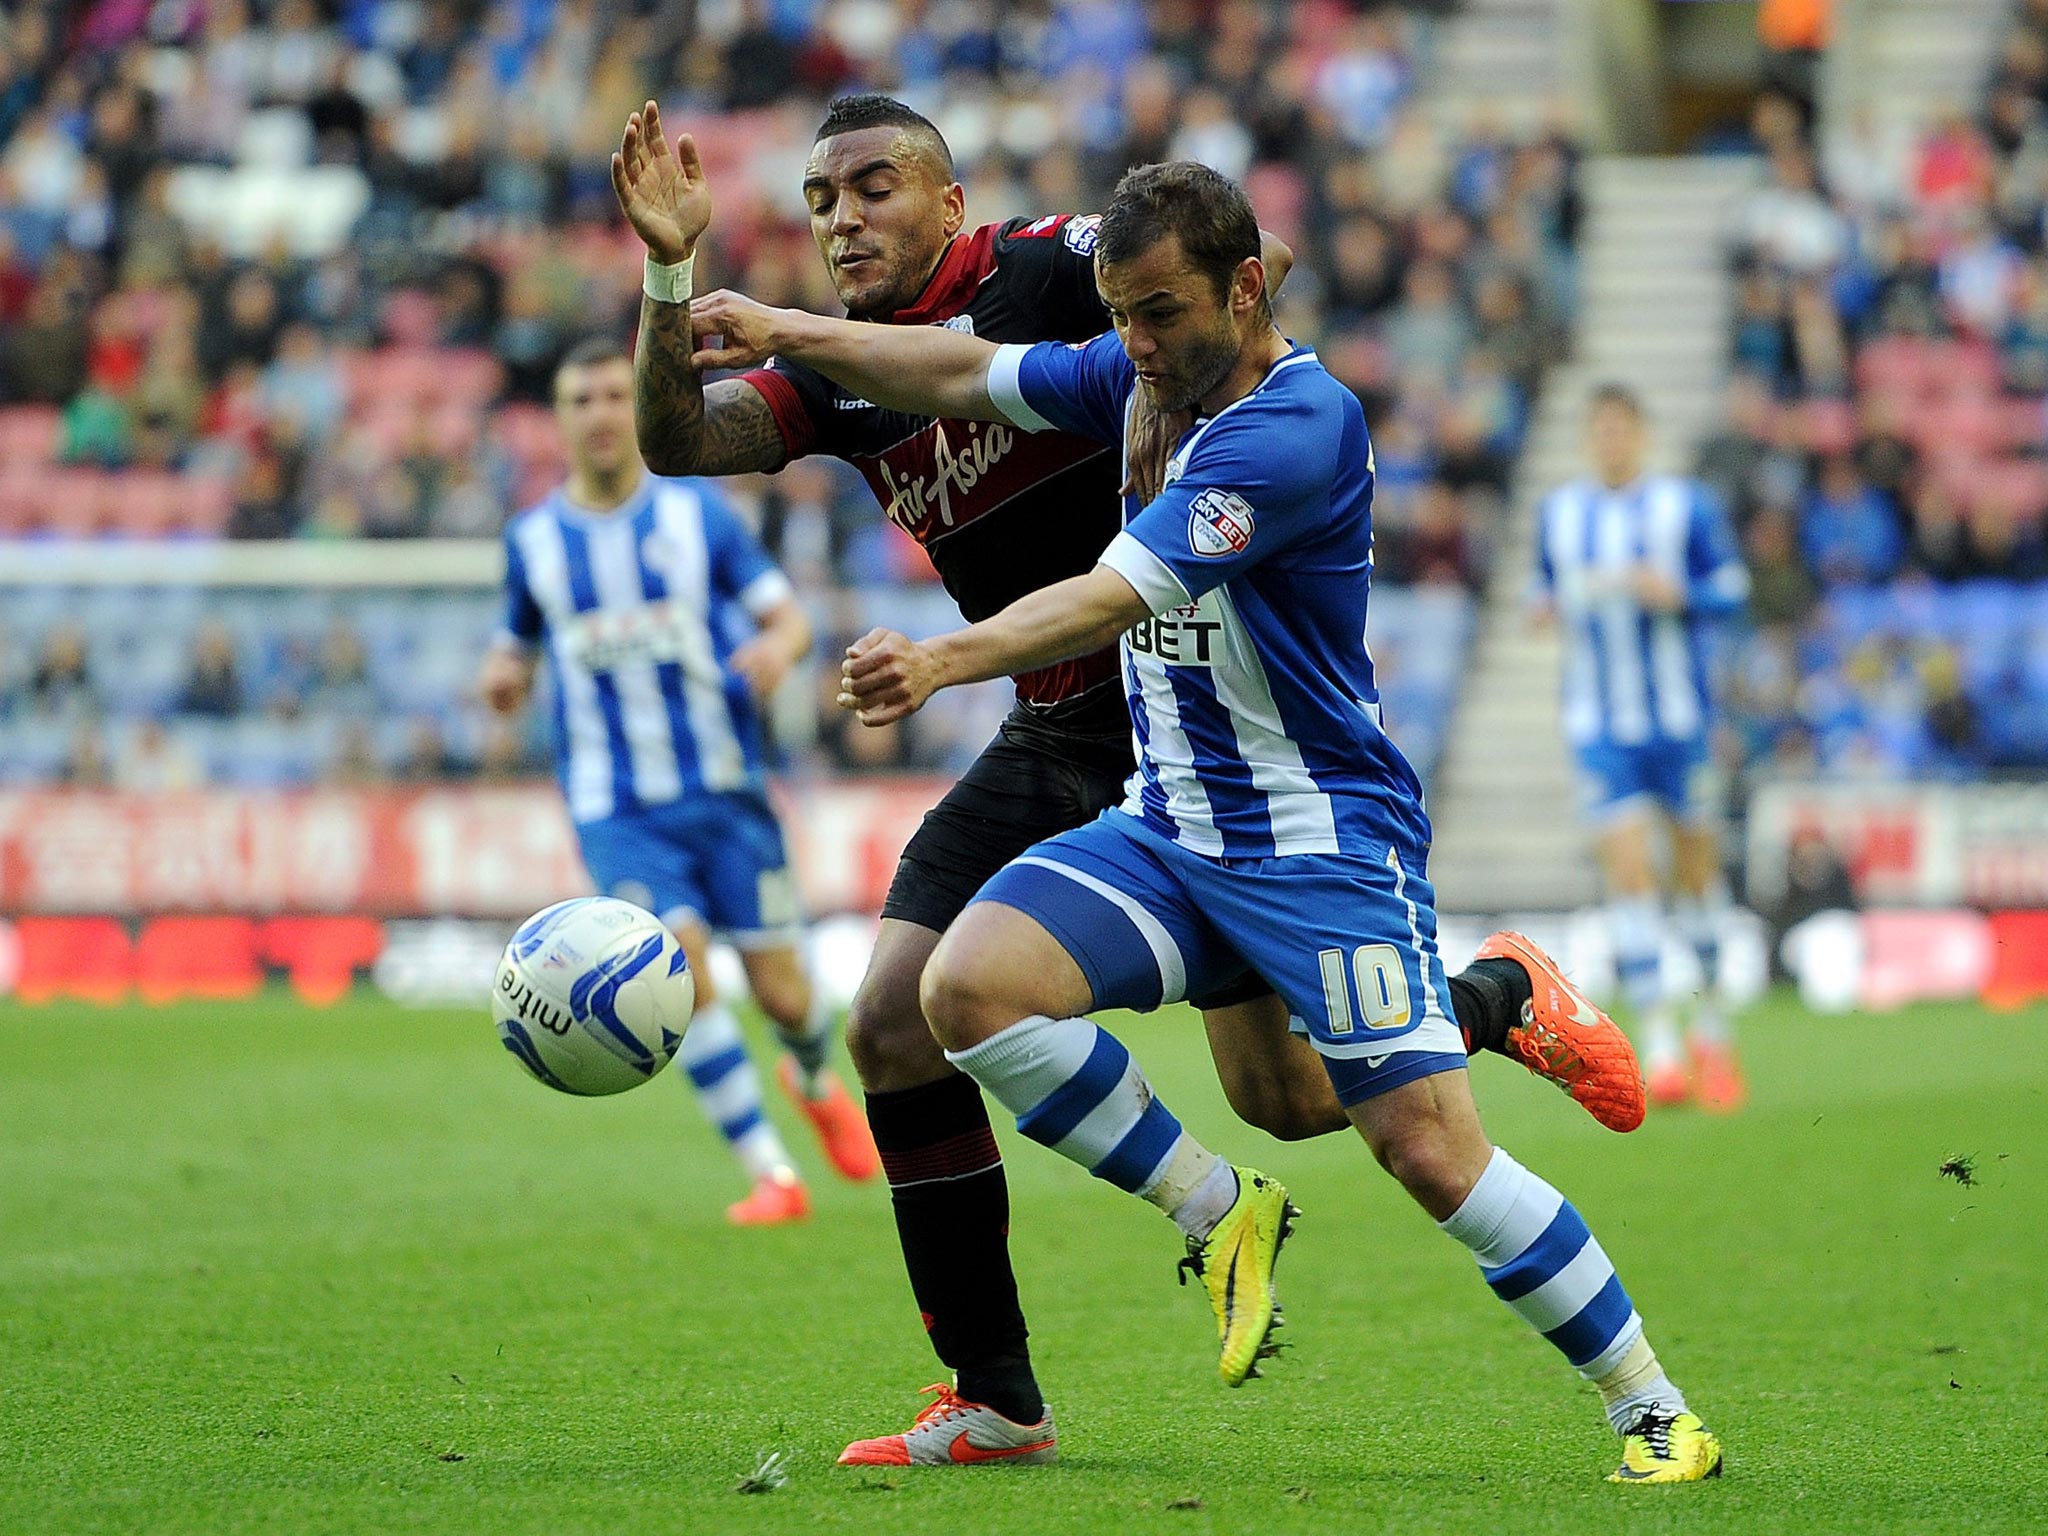 Wigan Athletic's Shaun Maloney battles for the ball with Queens Park Rangers Danny Simpson